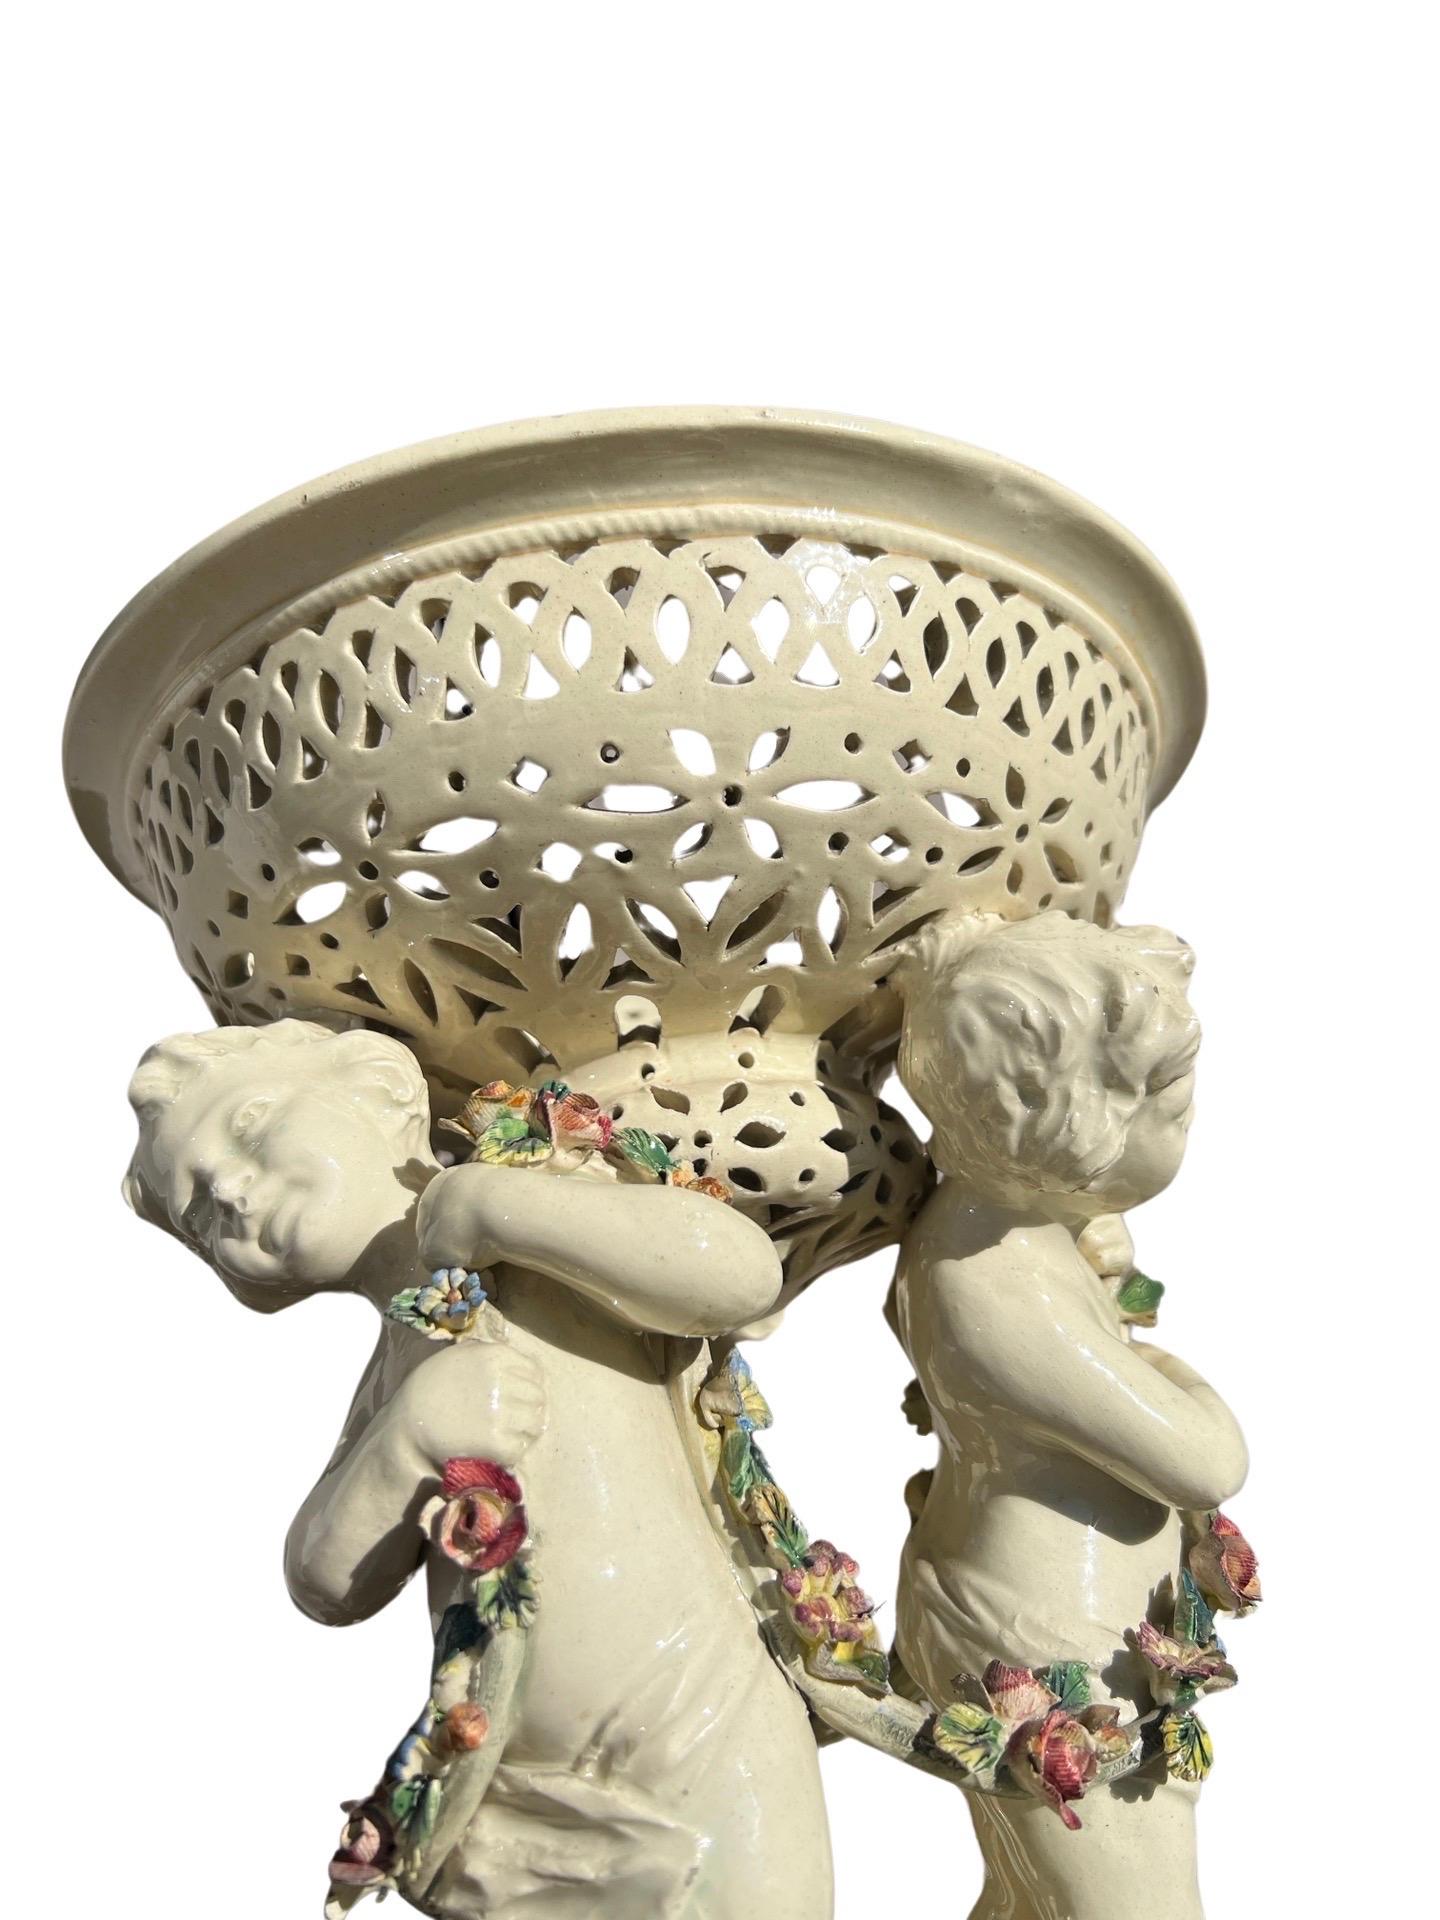 19th Century French Tin Glazed Creamware Centerpiece Adorned With Putti Supports For Sale 4